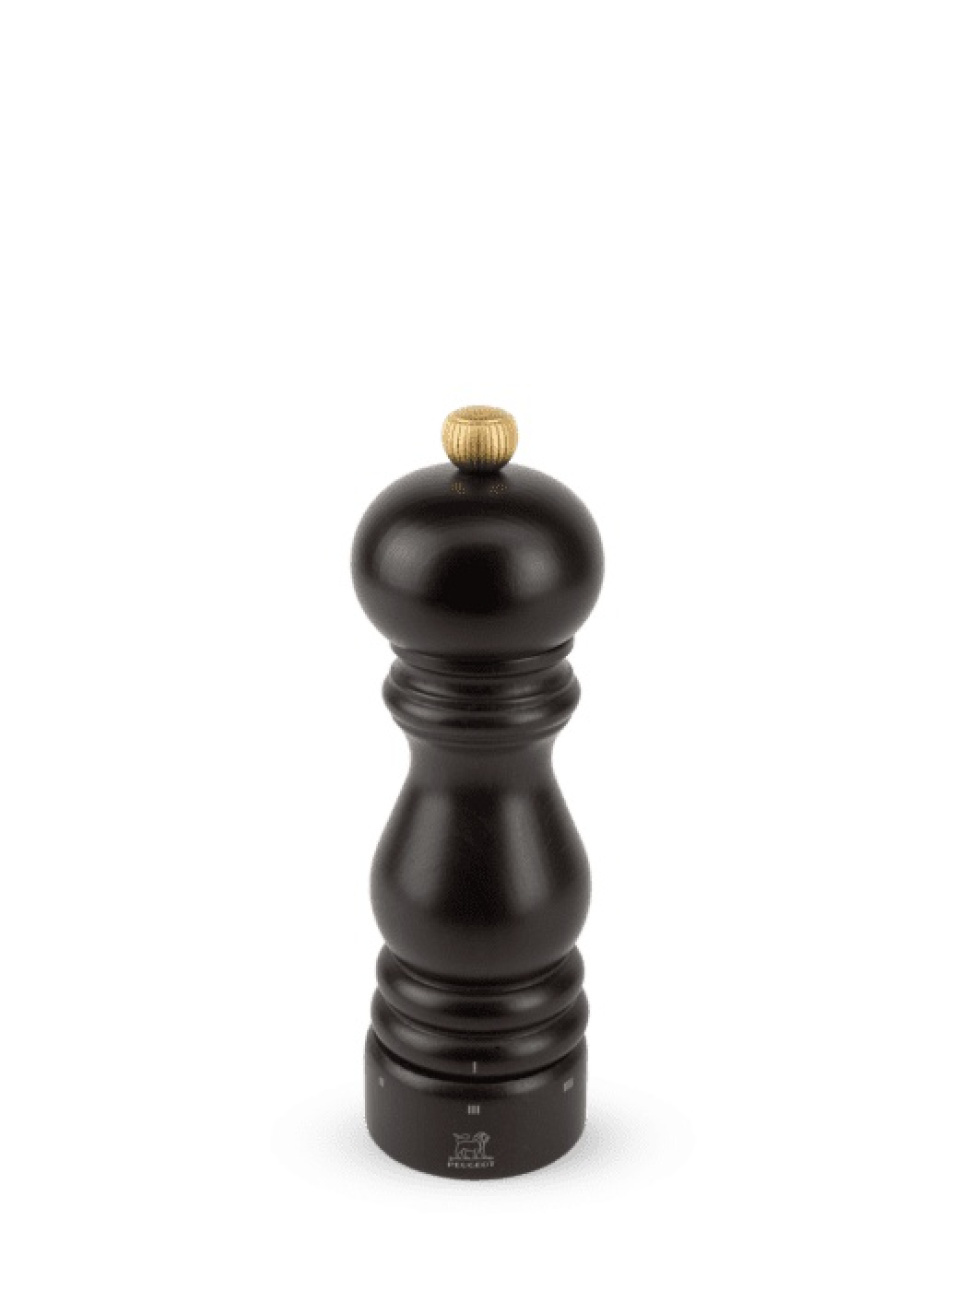 Paris Pepper mill 18 cm, U Select, Chocolate brown - Peugeot in the group Cooking / Kitchen utensils / Salt & pepper mills at KitchenLab (1090-13449)